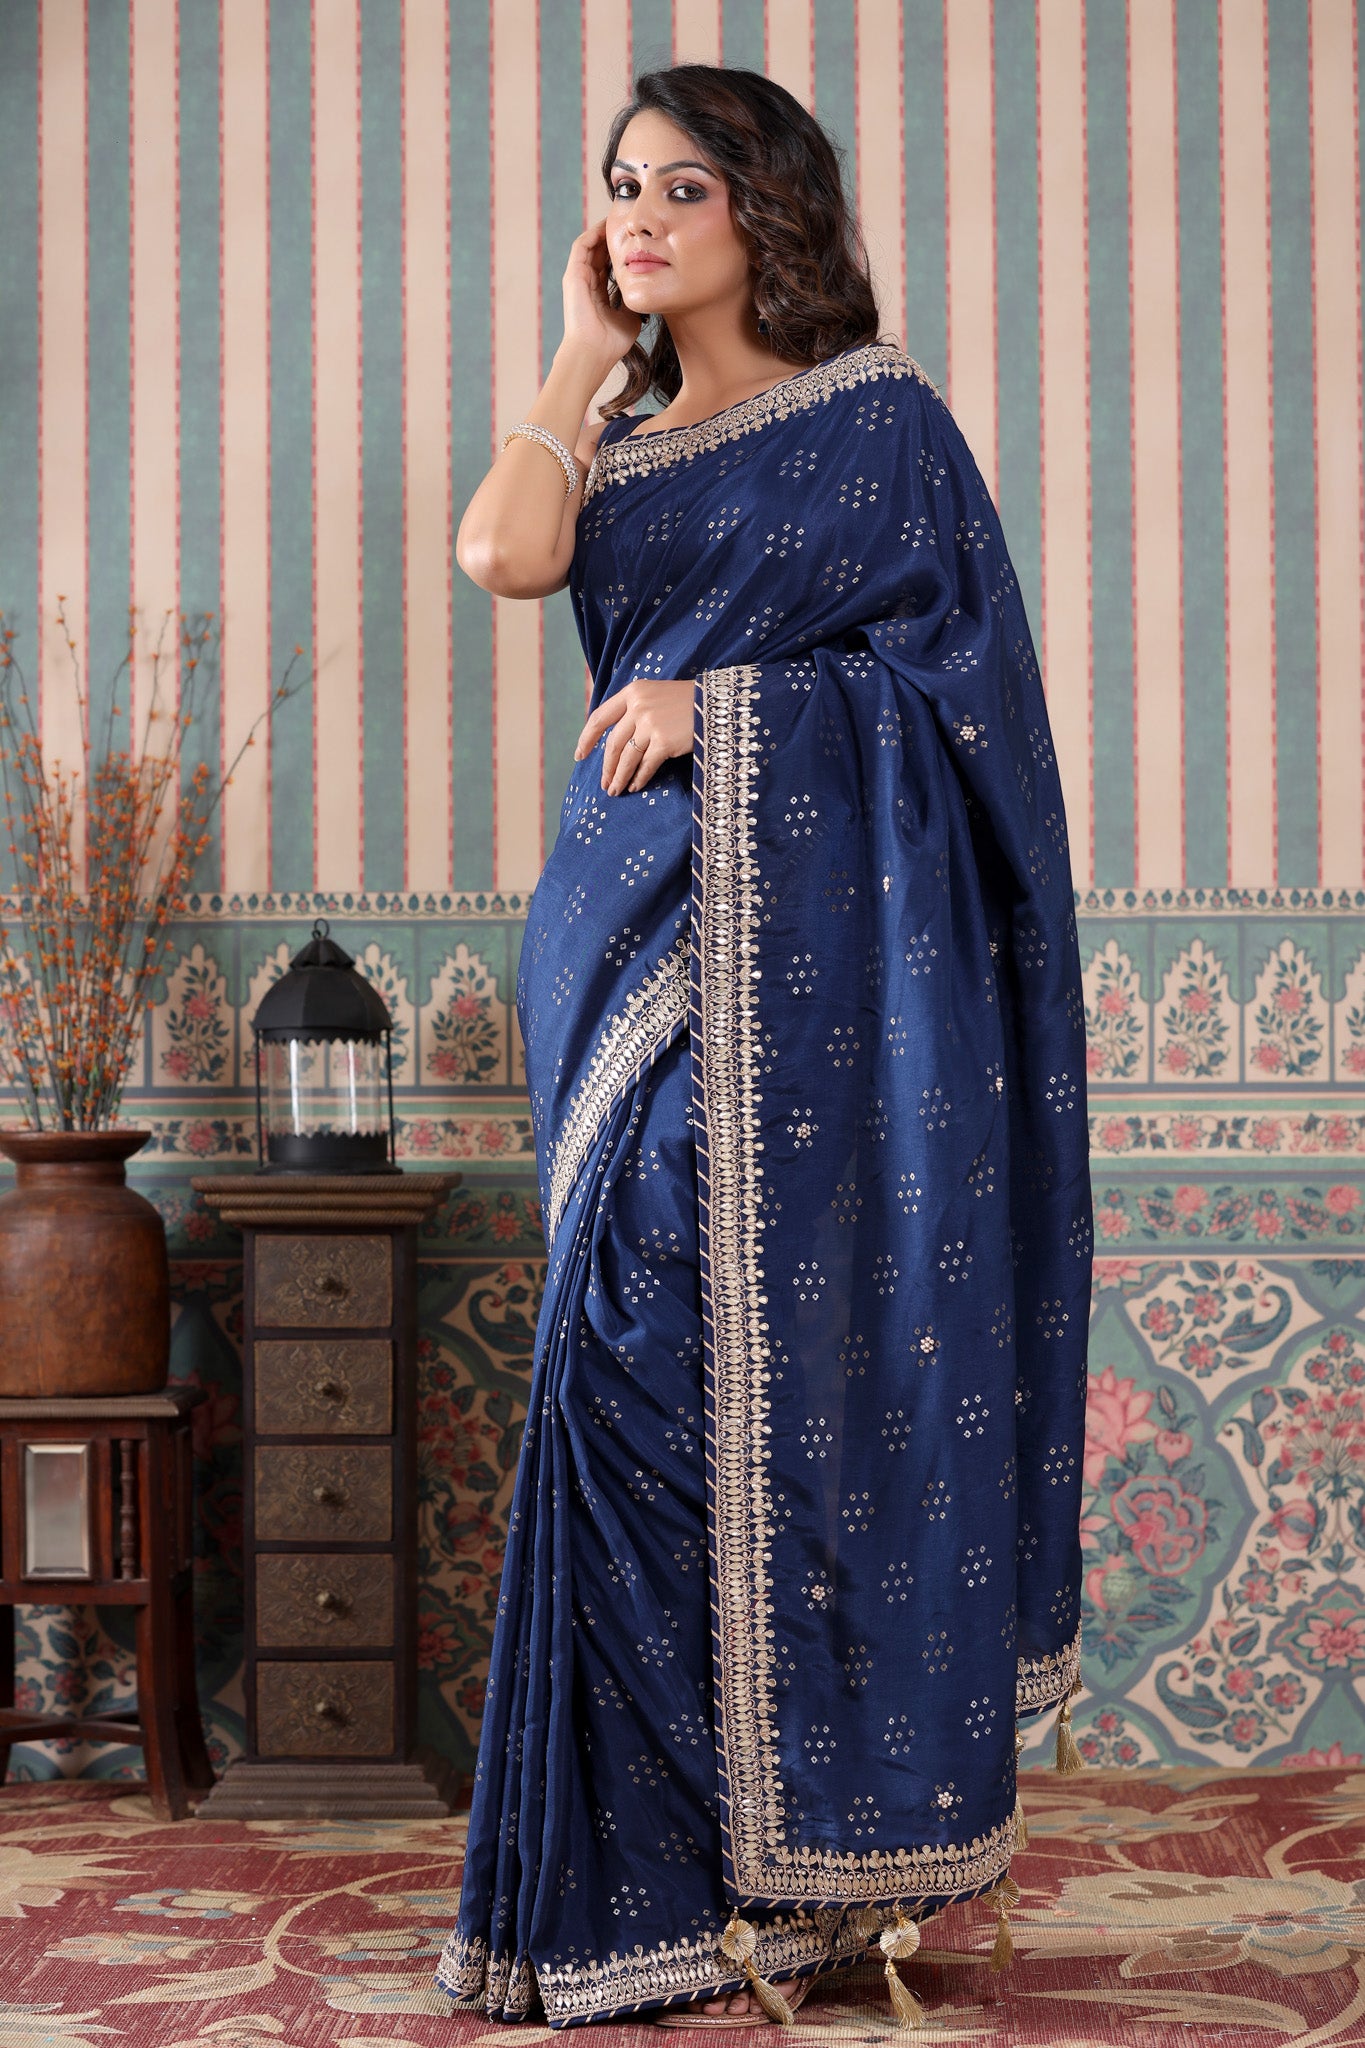 Buy beautiful navy blue georgette saree online in USA with embroidered border. Make a fashion statement at weddings with stunning designer sarees, embroidered sarees with blouse, wedding sarees, handloom sarees from Pure Elegance Indian fashion store in USA.-pallu